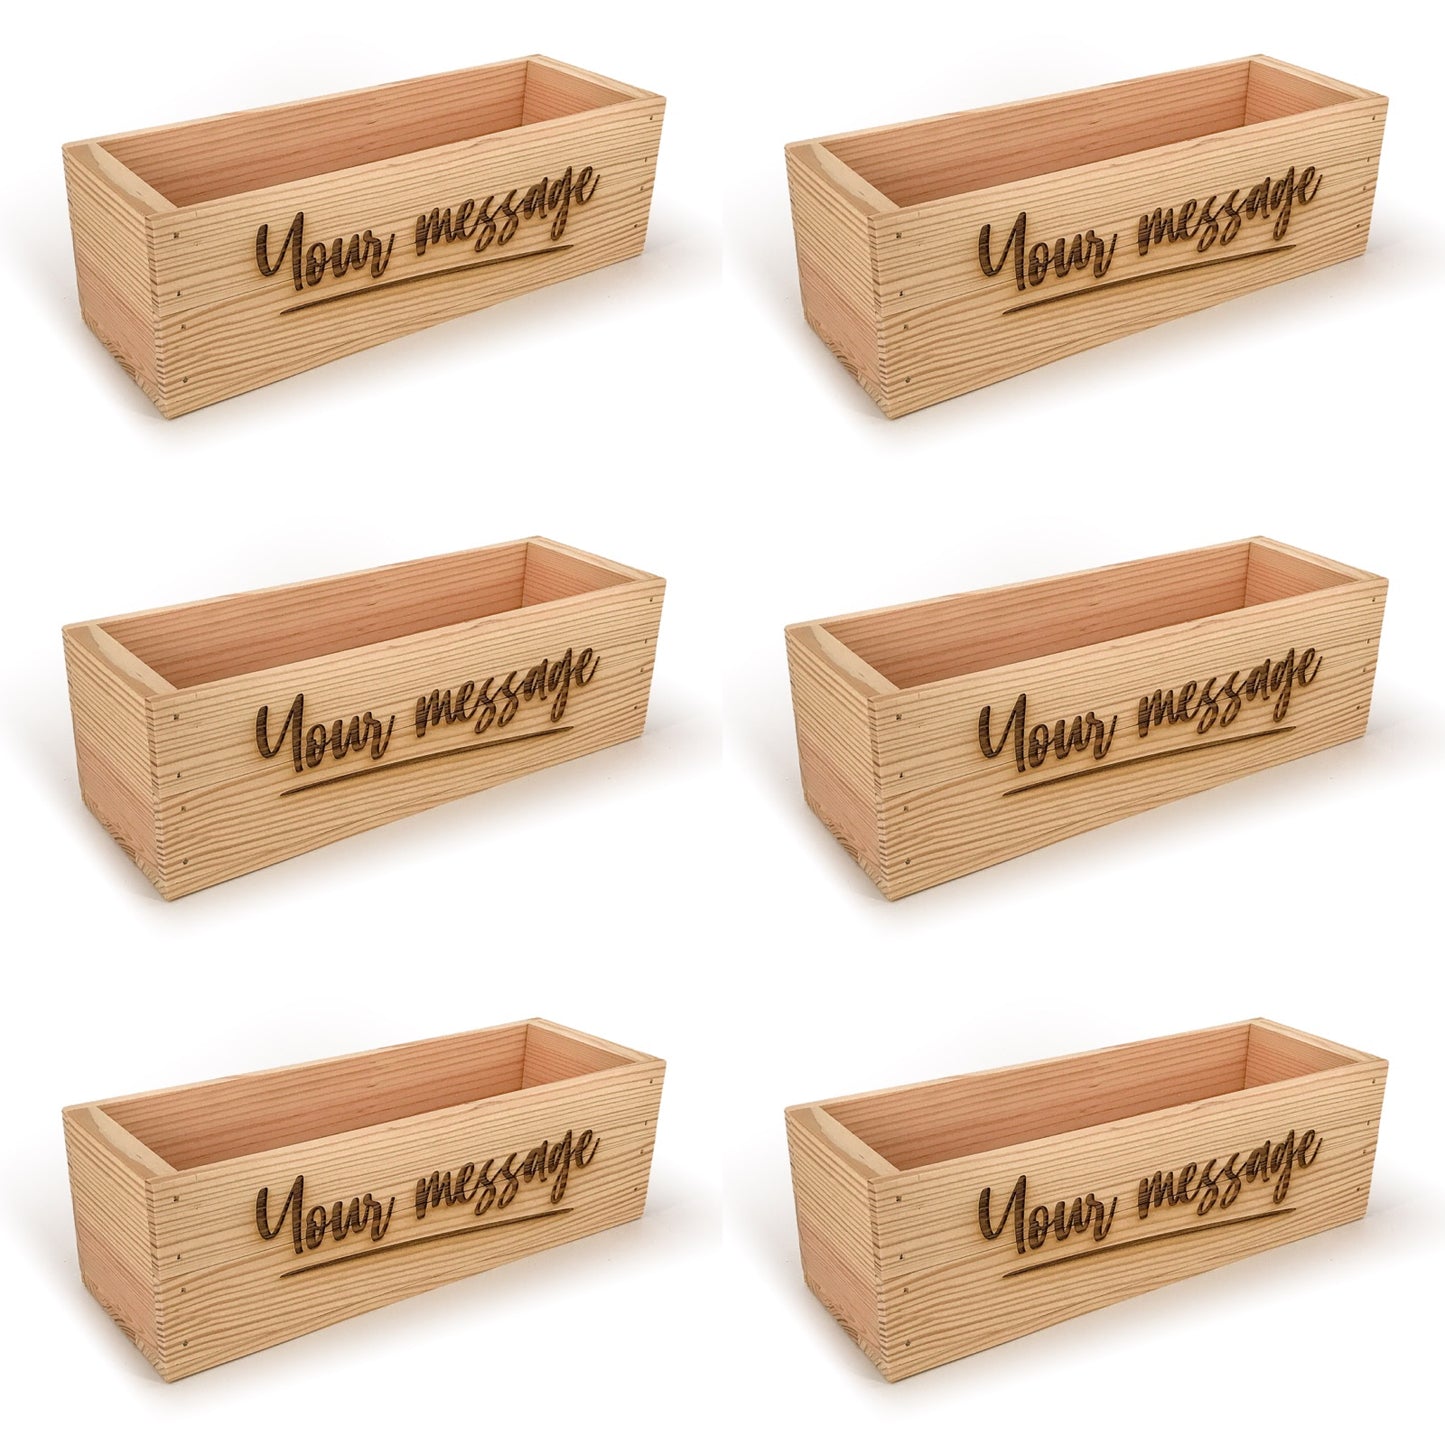 6 Single Bottle Wine Crate Box with Custom Message 14x4.5x4.5, 6-WB-14-4.5-4.5-ST-NW-NL,  12-WB-14-4.5-4.5-ST-NW-NL,  24-WB-14-4.5-4.5-ST-NW-NL,  48-WB-14-4.5-4.5-ST-NW-NL,  96-WB-14-4.5-4.5-ST-NW-NL